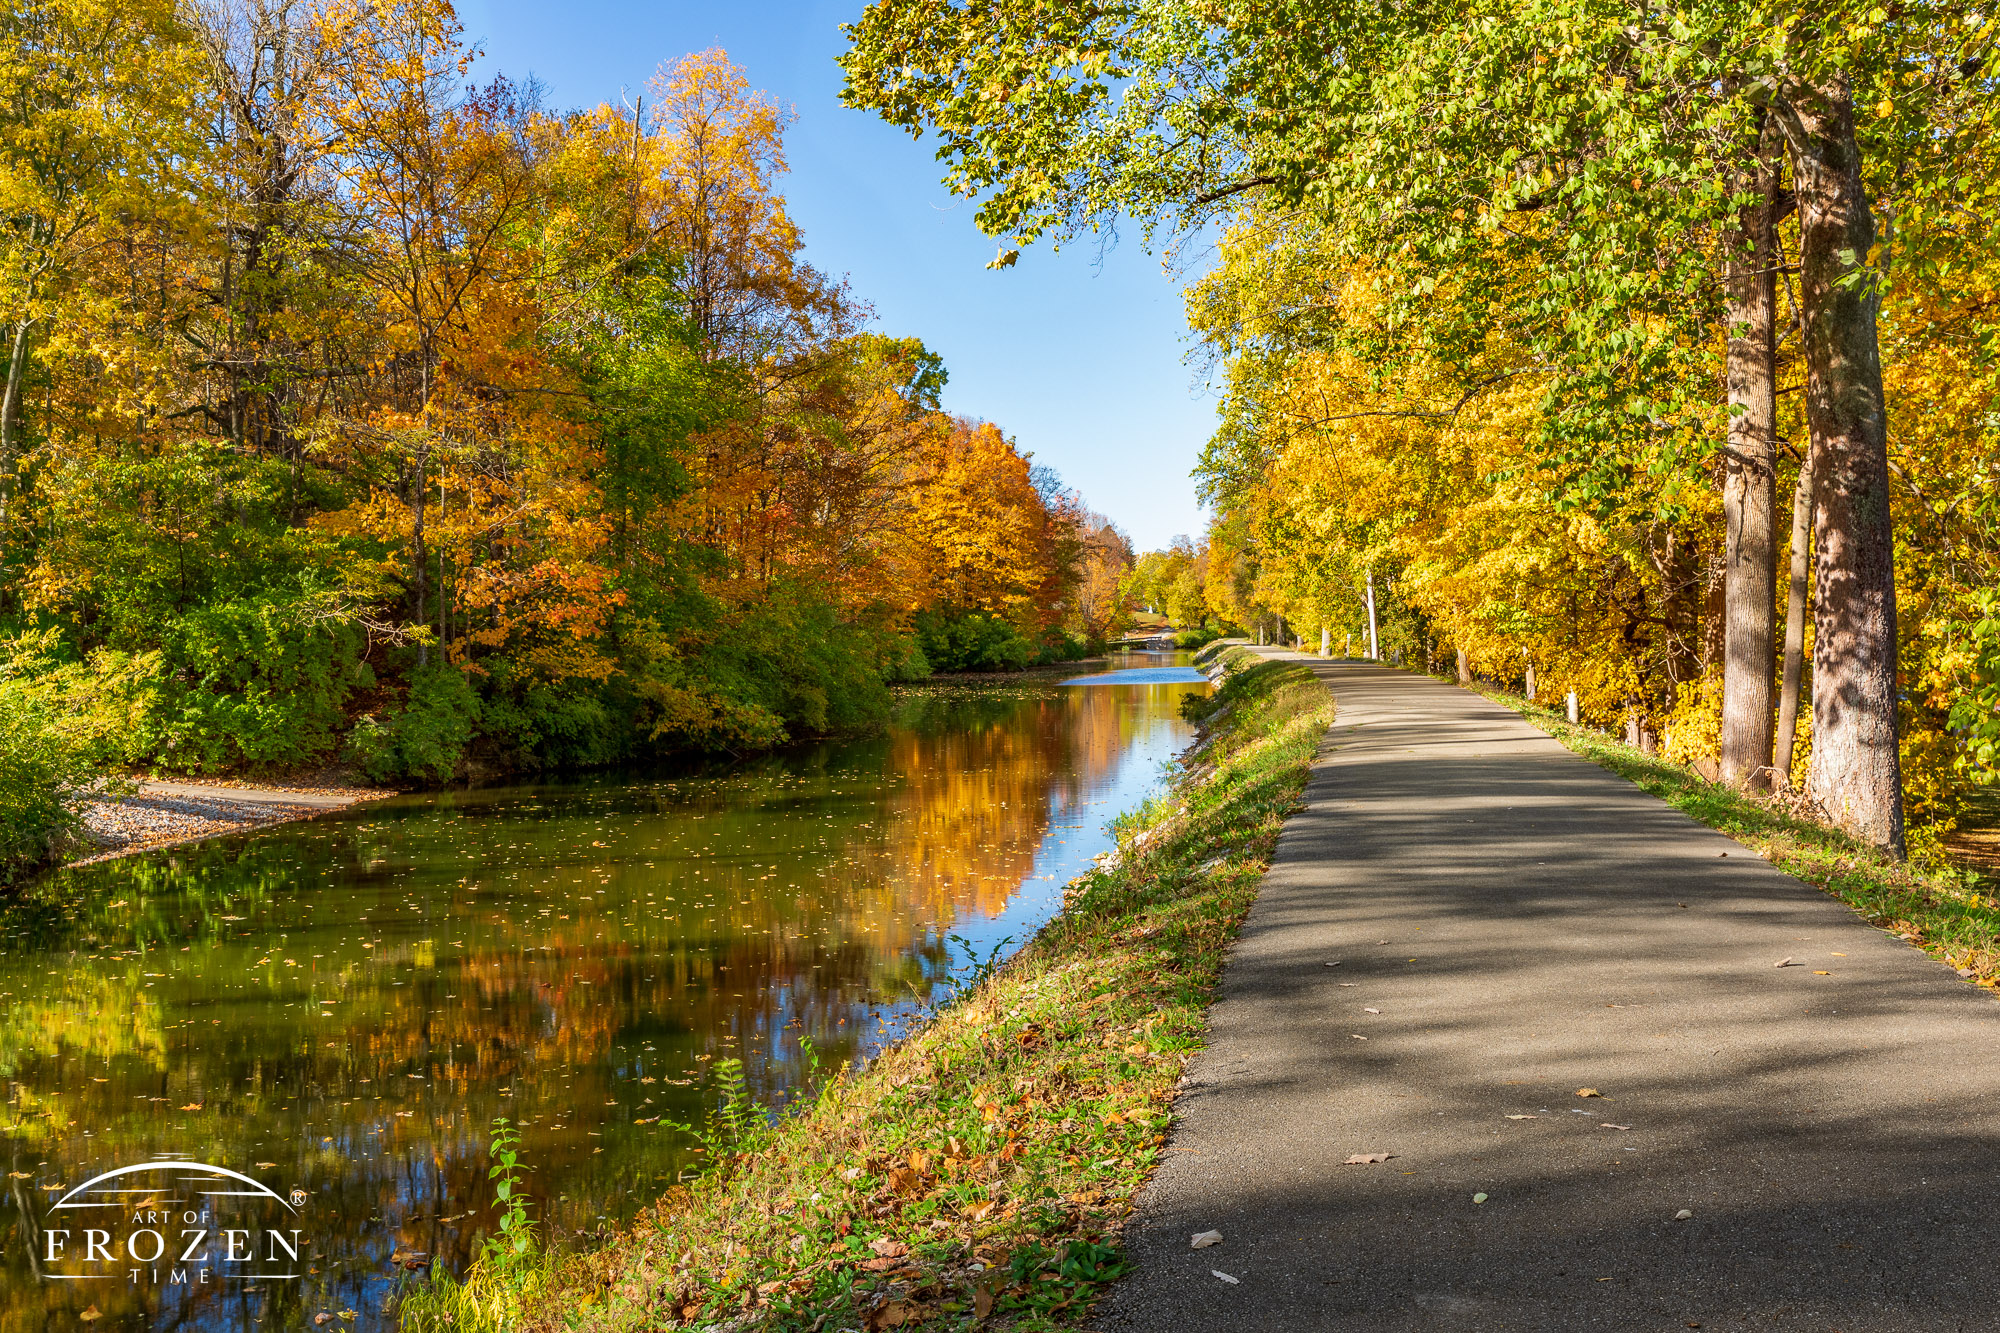 A tree-lined paved trail parallels Piqua Ohio’s Hydraulic Canal Run in autumn where the sun illuminated the autumn colored leaves